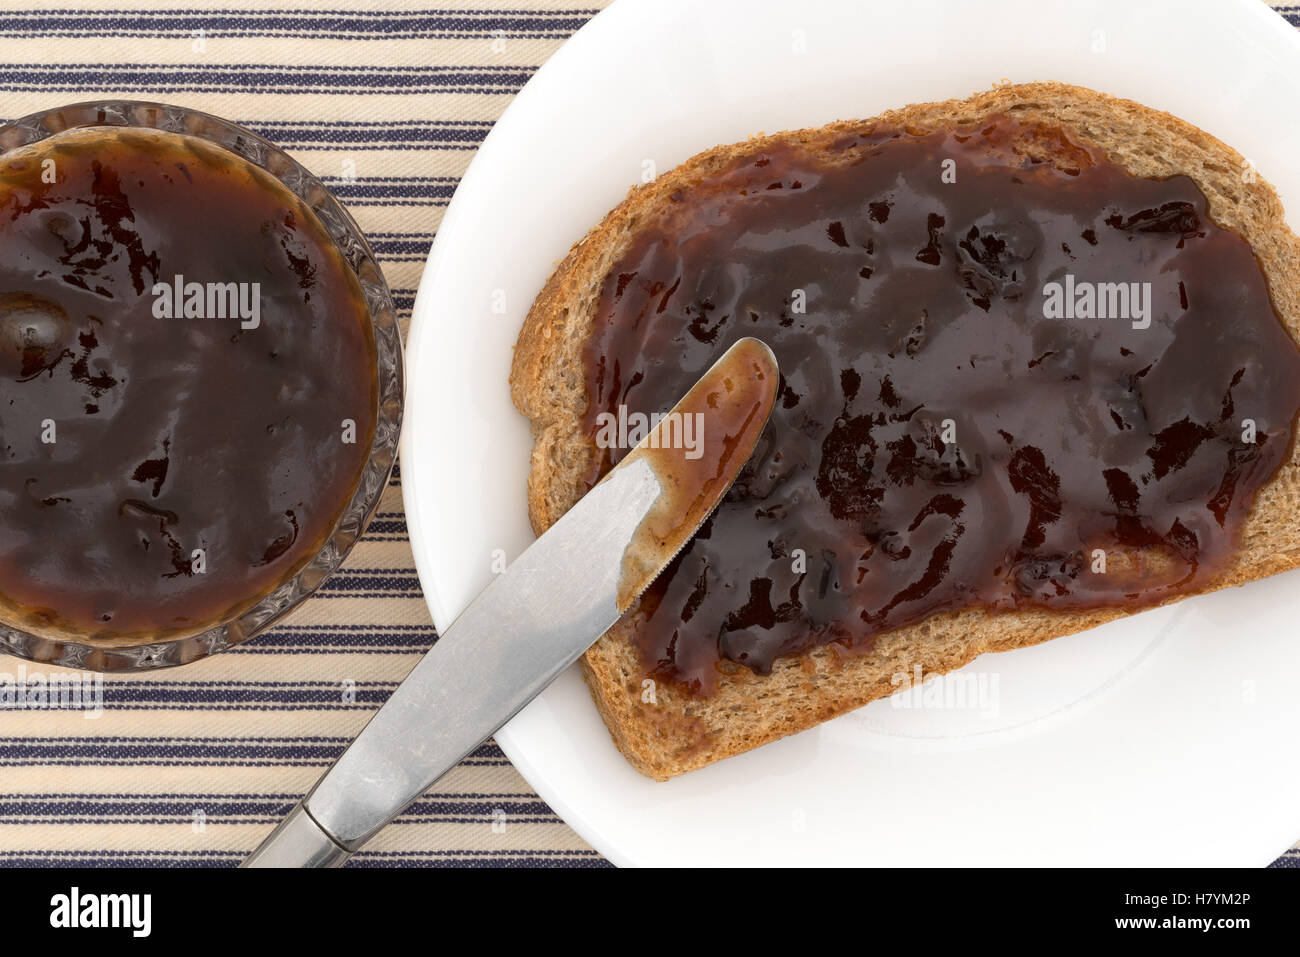 Top close view of plum preserves spread on a piece of wheat bread atop a white plate with a butter knife Stock Photo